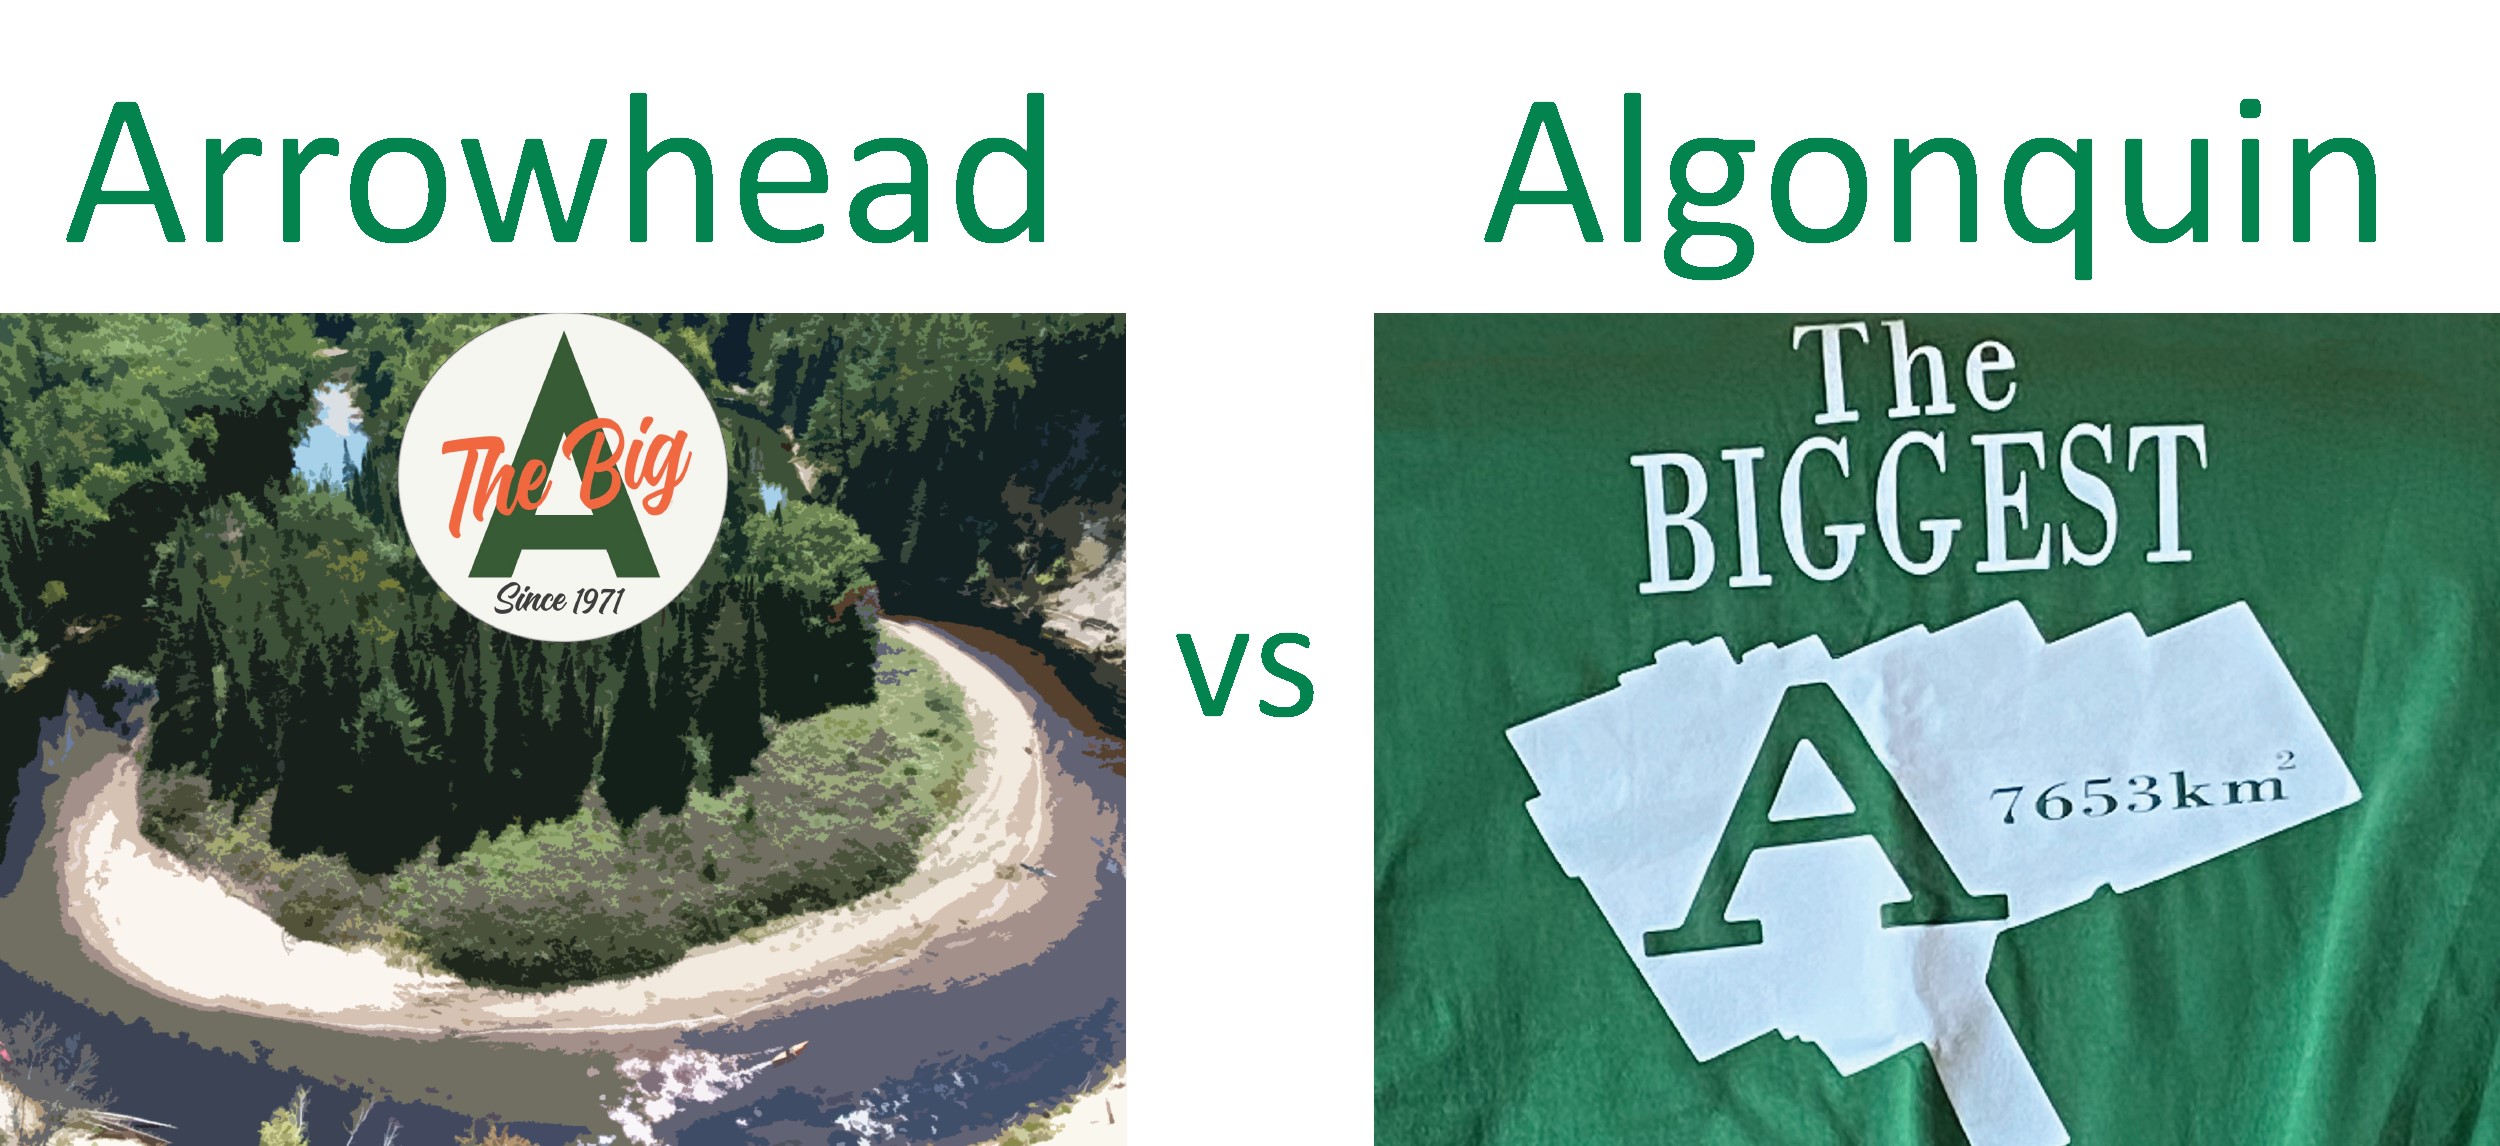 Two designs side by side, each claiming to be "the big A". On the left is a design from Arrowhead Provincial Park. On the right, a design from Algonquin Provincial Park.